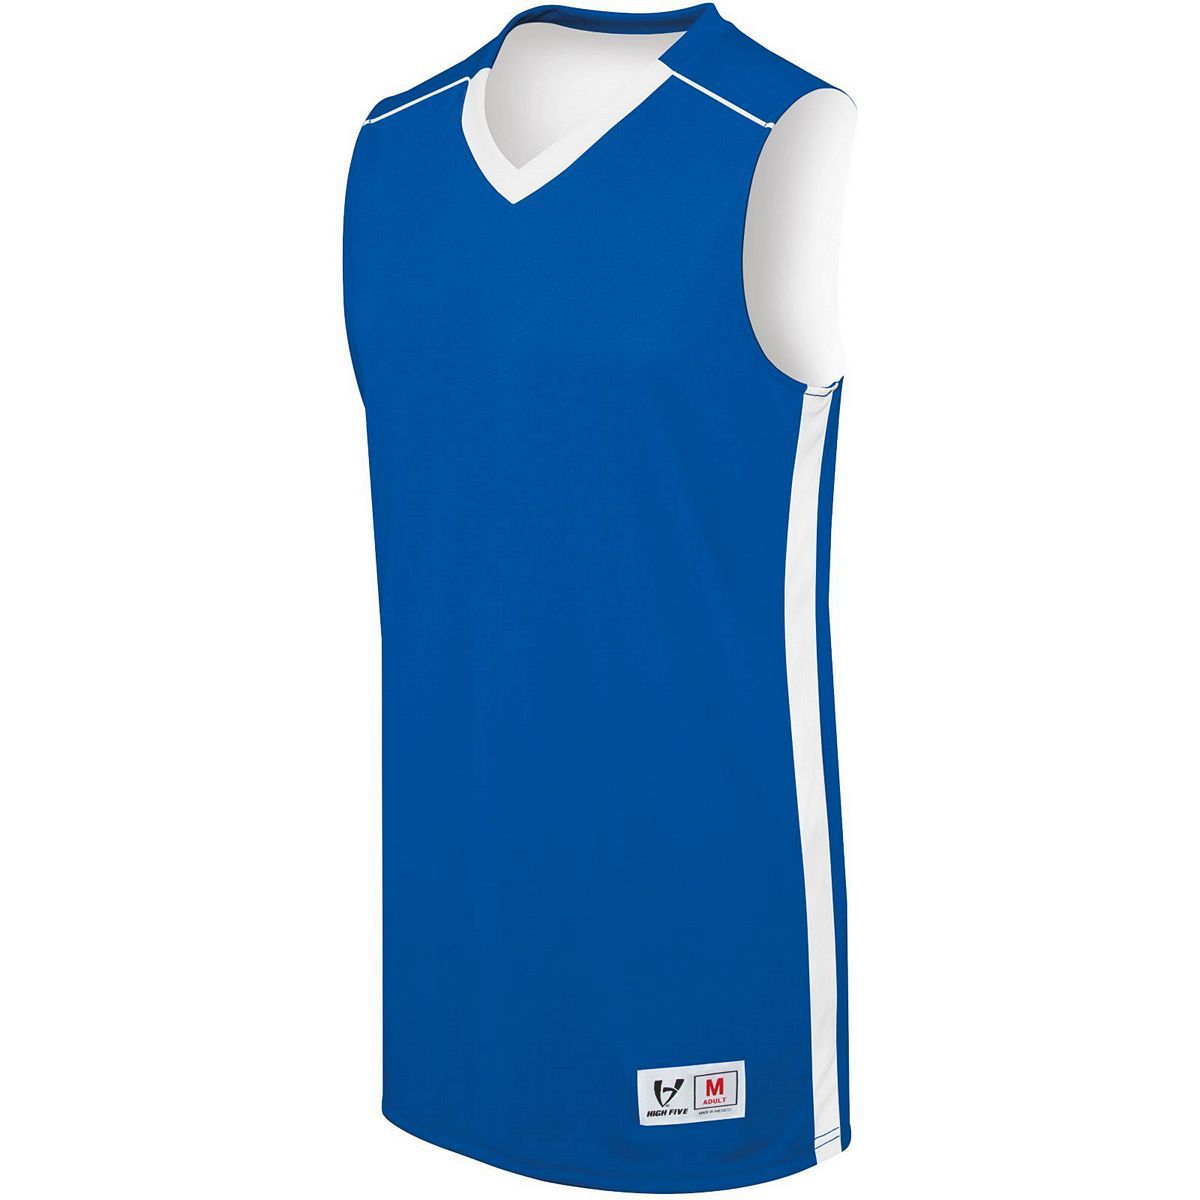 Augusta Sportswear Adult Competition Reversible Jersey in Royal/White  -Part of the Adult, Adult-Jersey, Augusta-Products, Basketball, Shirts, All-Sports, All-Sports-1 product lines at KanaleyCreations.com